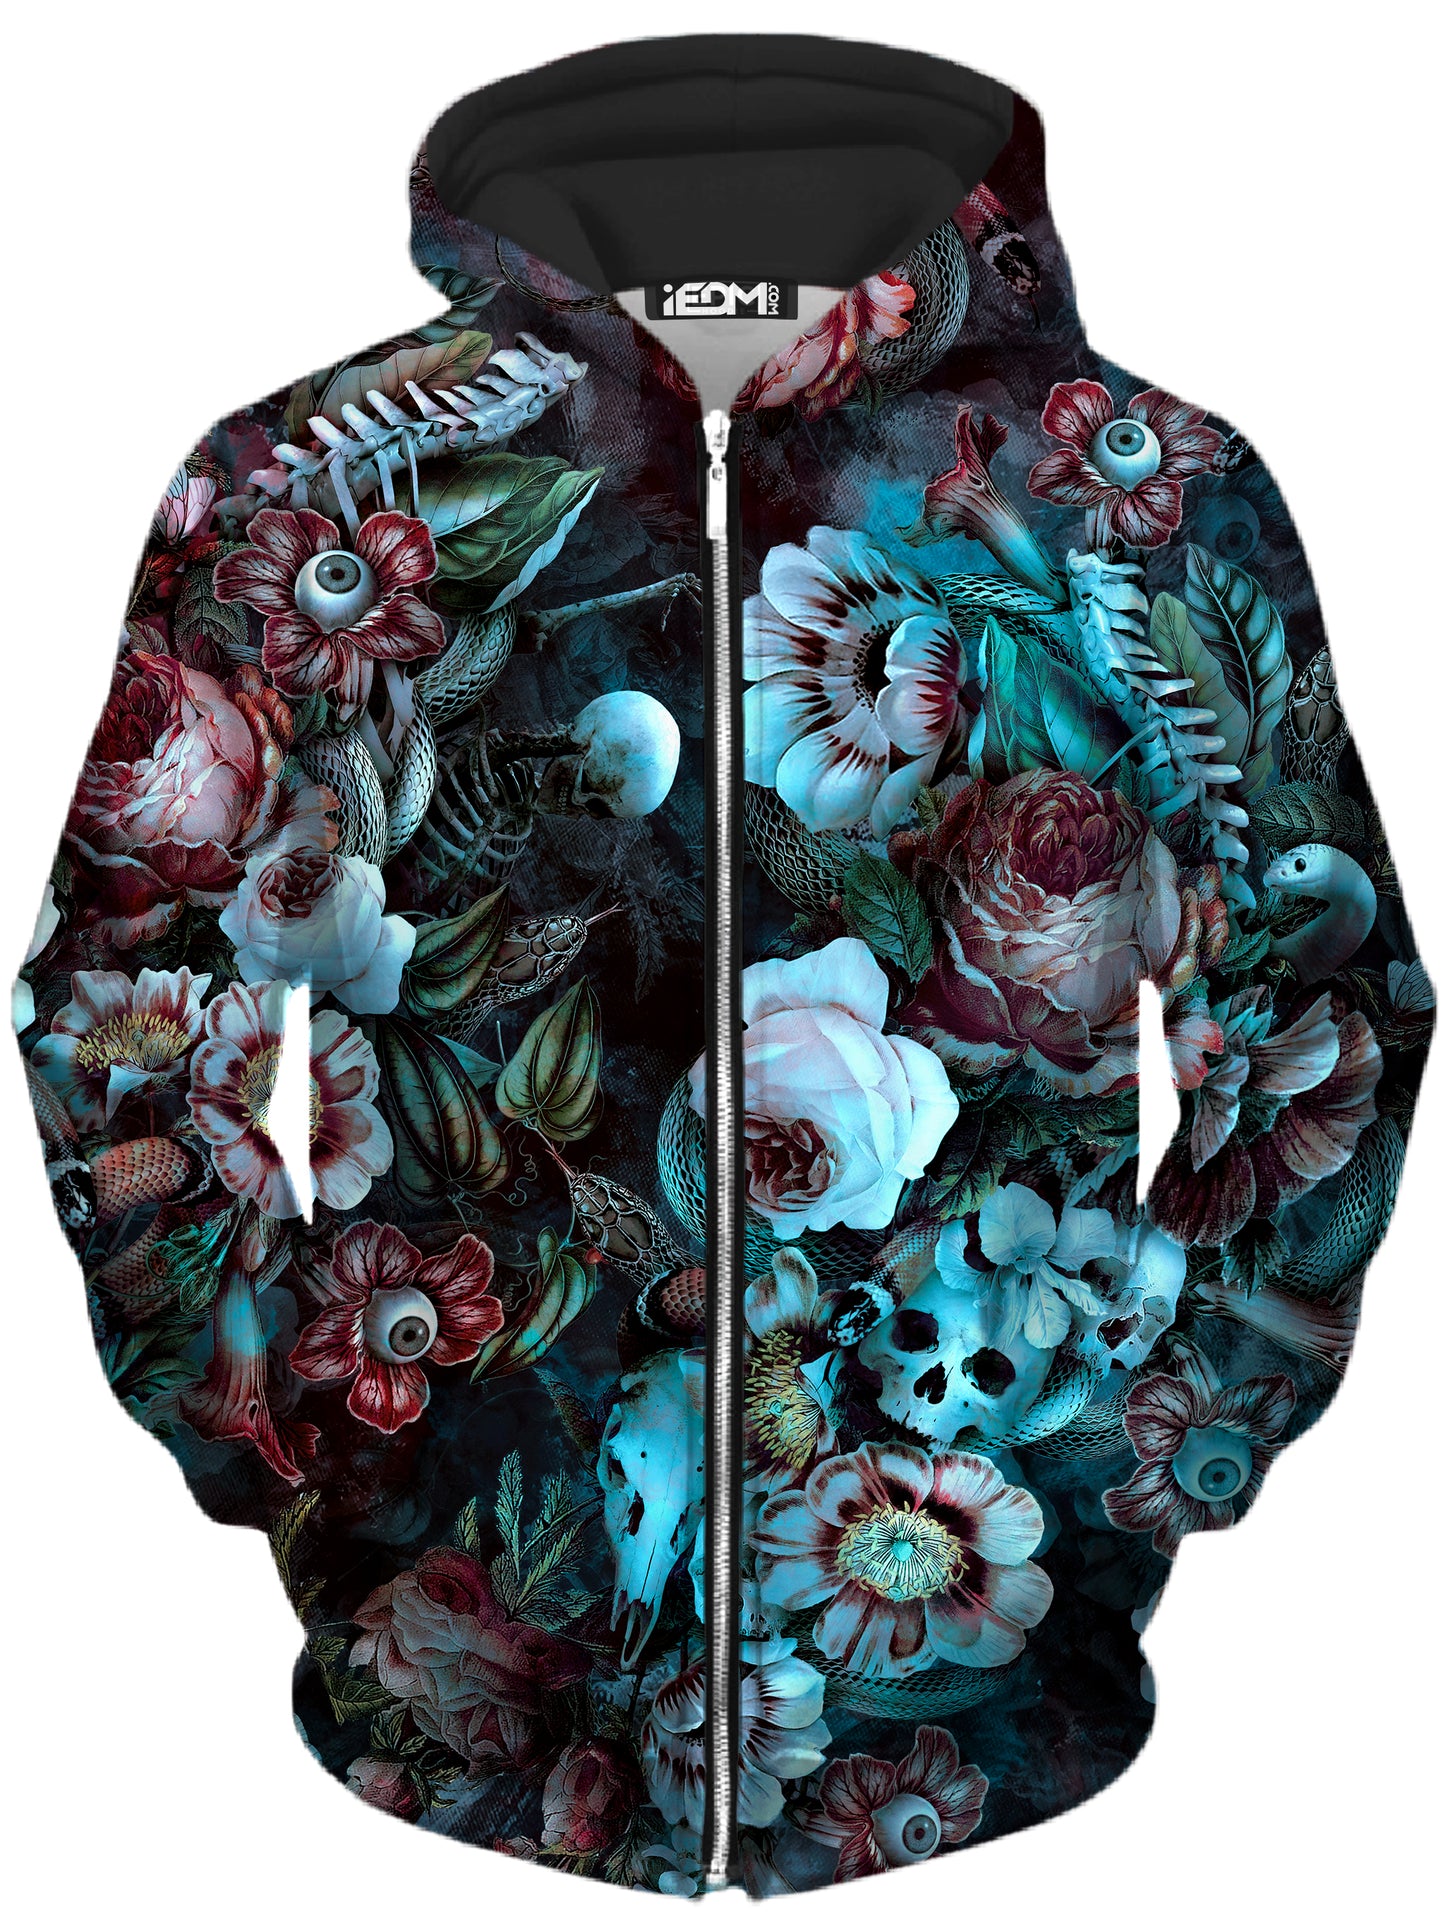 Eyes Of Darkness Zip-Up Hoodie and Joggers Combo, Riza Peker, | iEDM